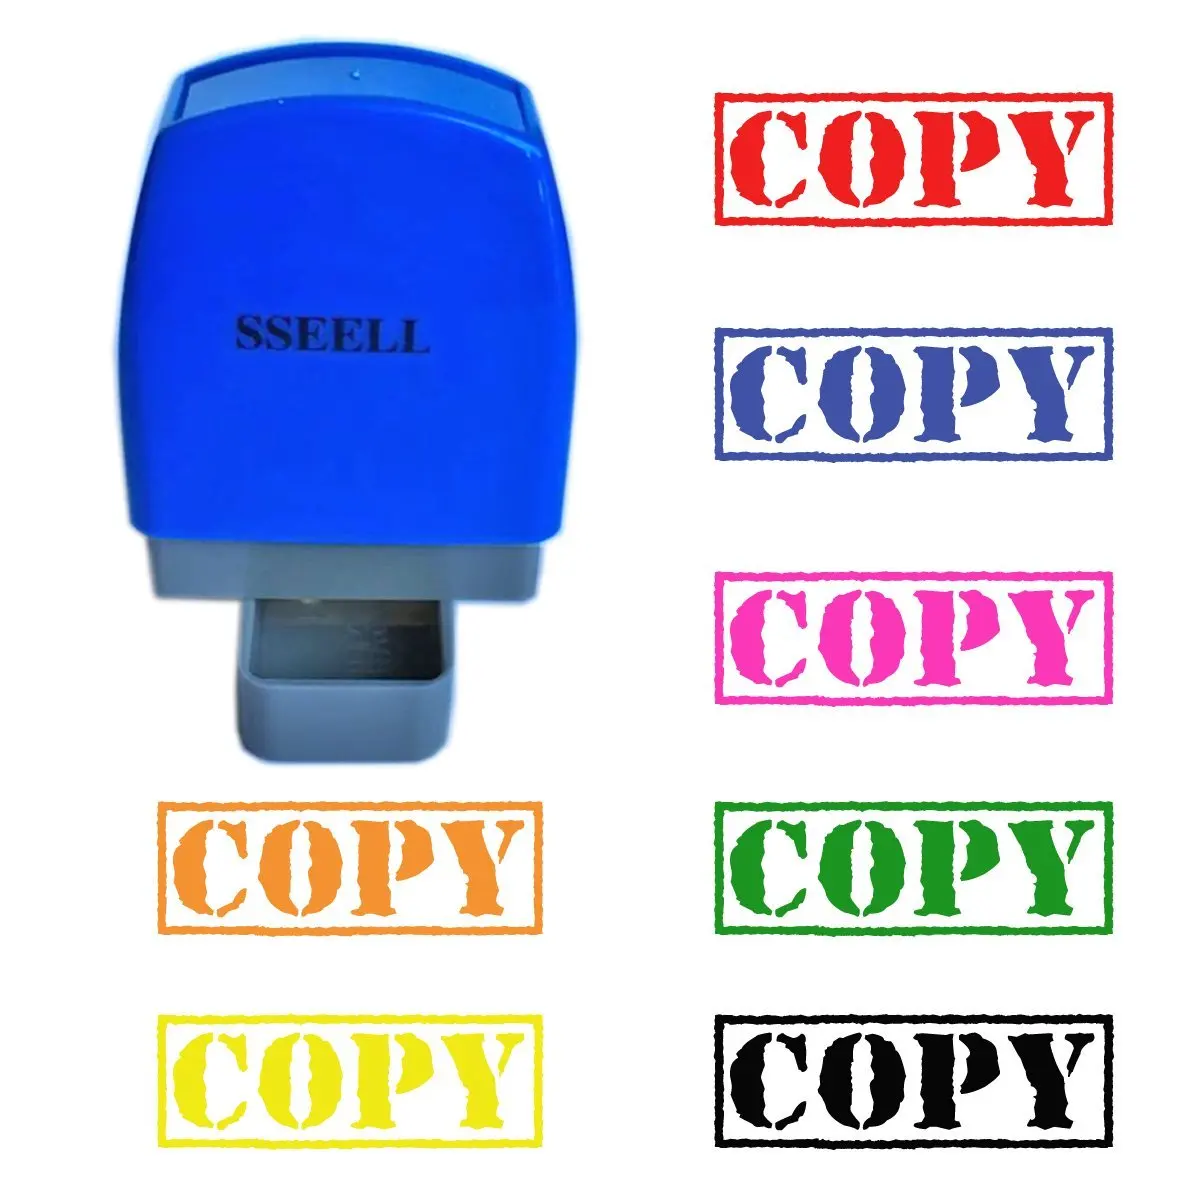 SSEELL COPY Self Inking Rubber Flash Stamp Self-Inking Pre-inked RE-inkable Office Work Company School Stationary Stamps With Frame Line Purple Ink Color